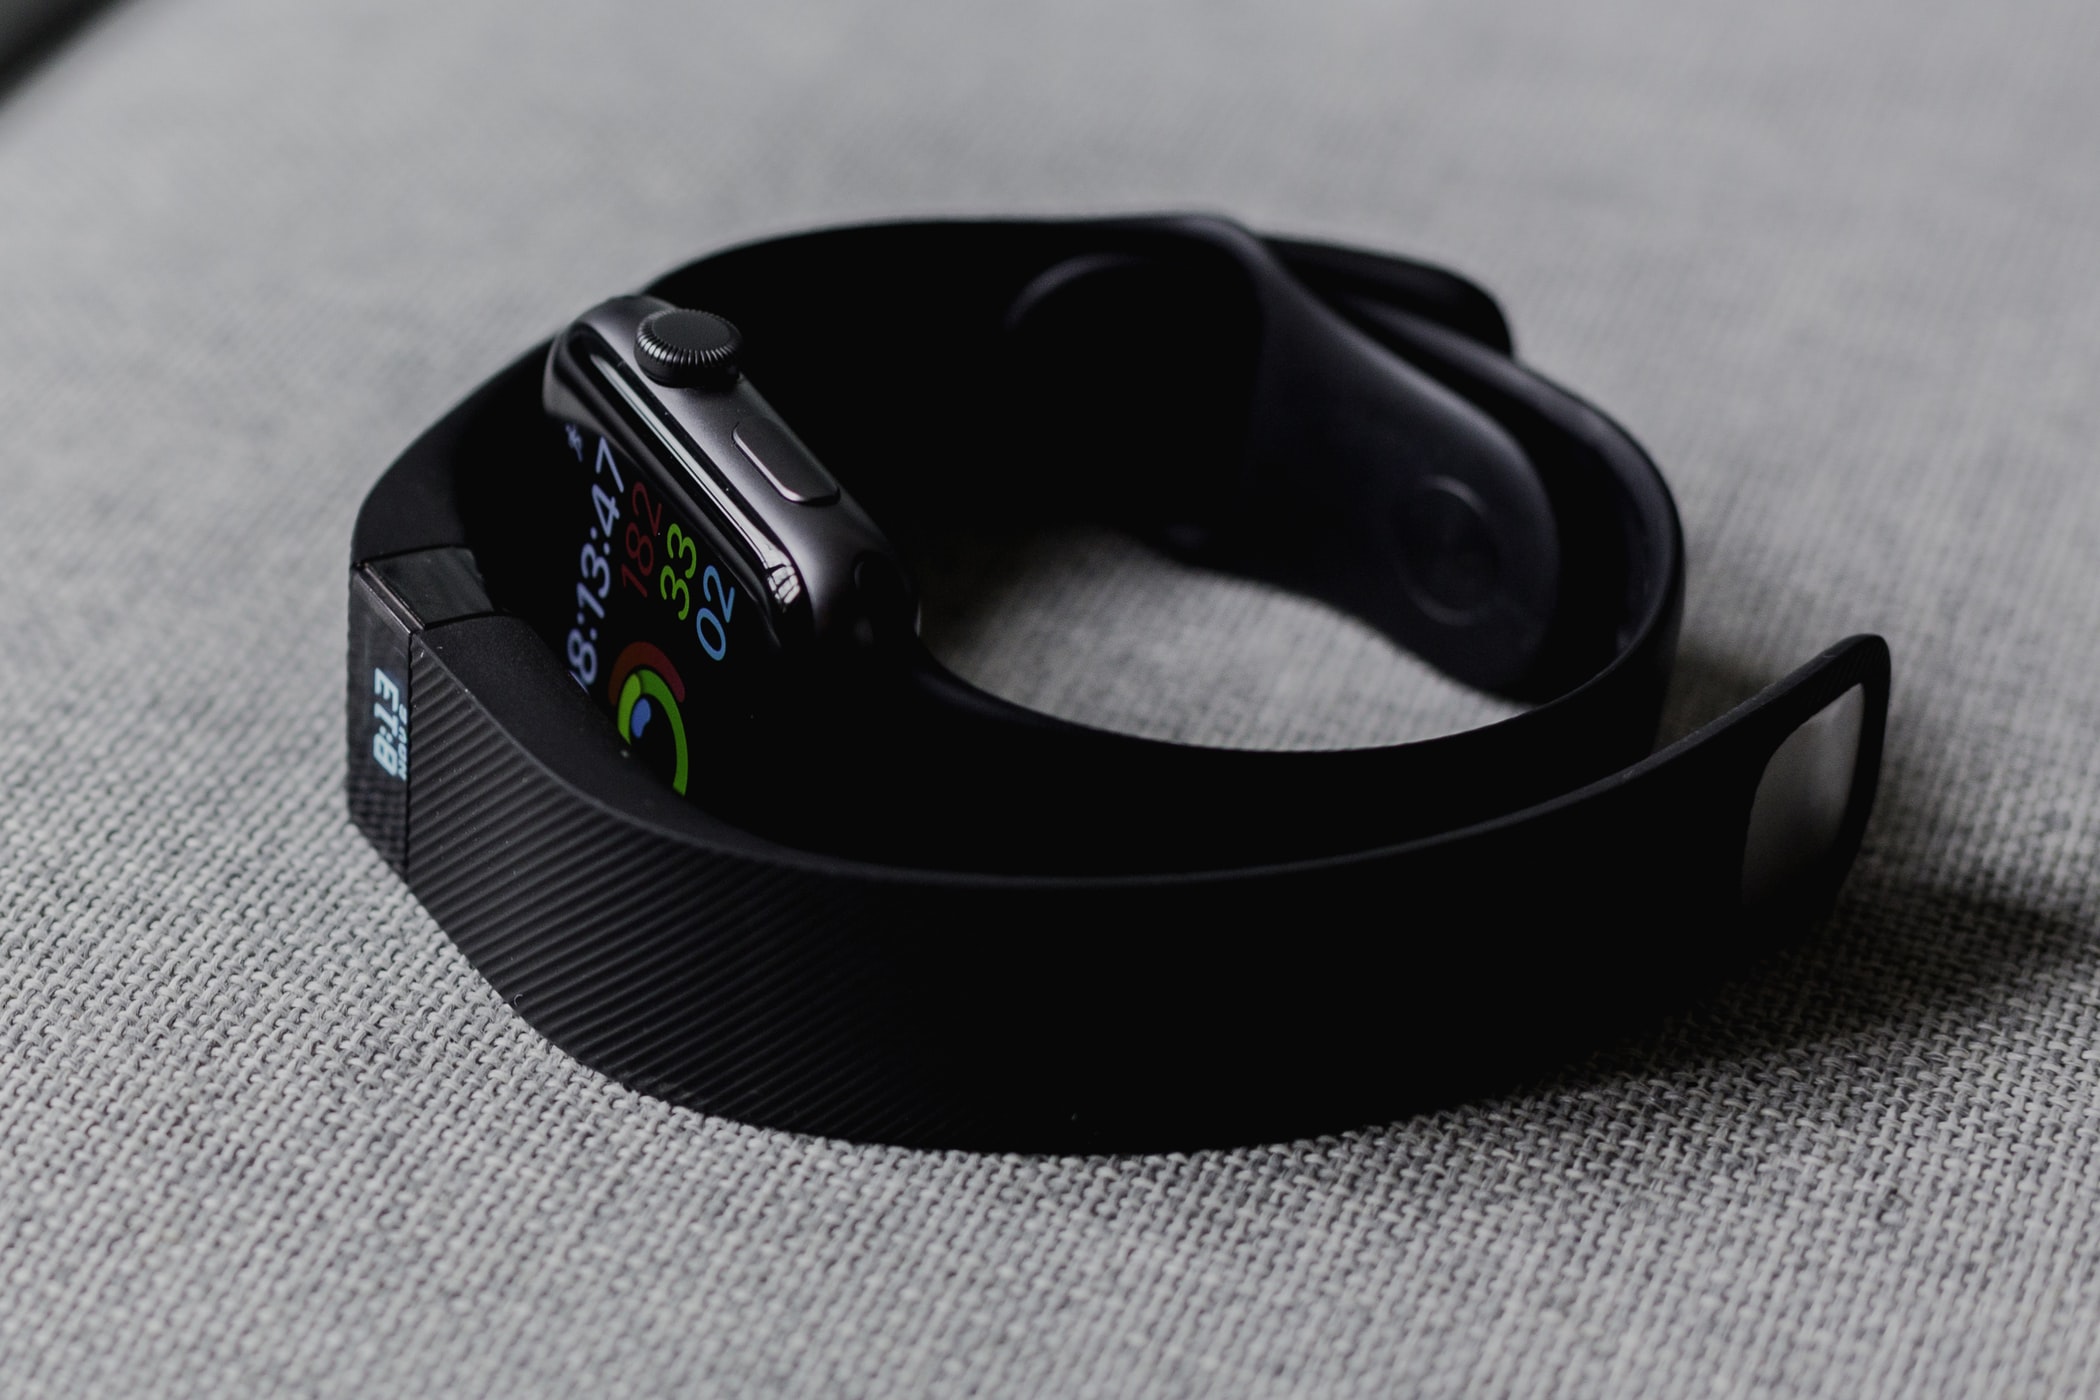 Account Access Issues: Troubleshooting Why You Can’t Log Into Your Fitbit Account